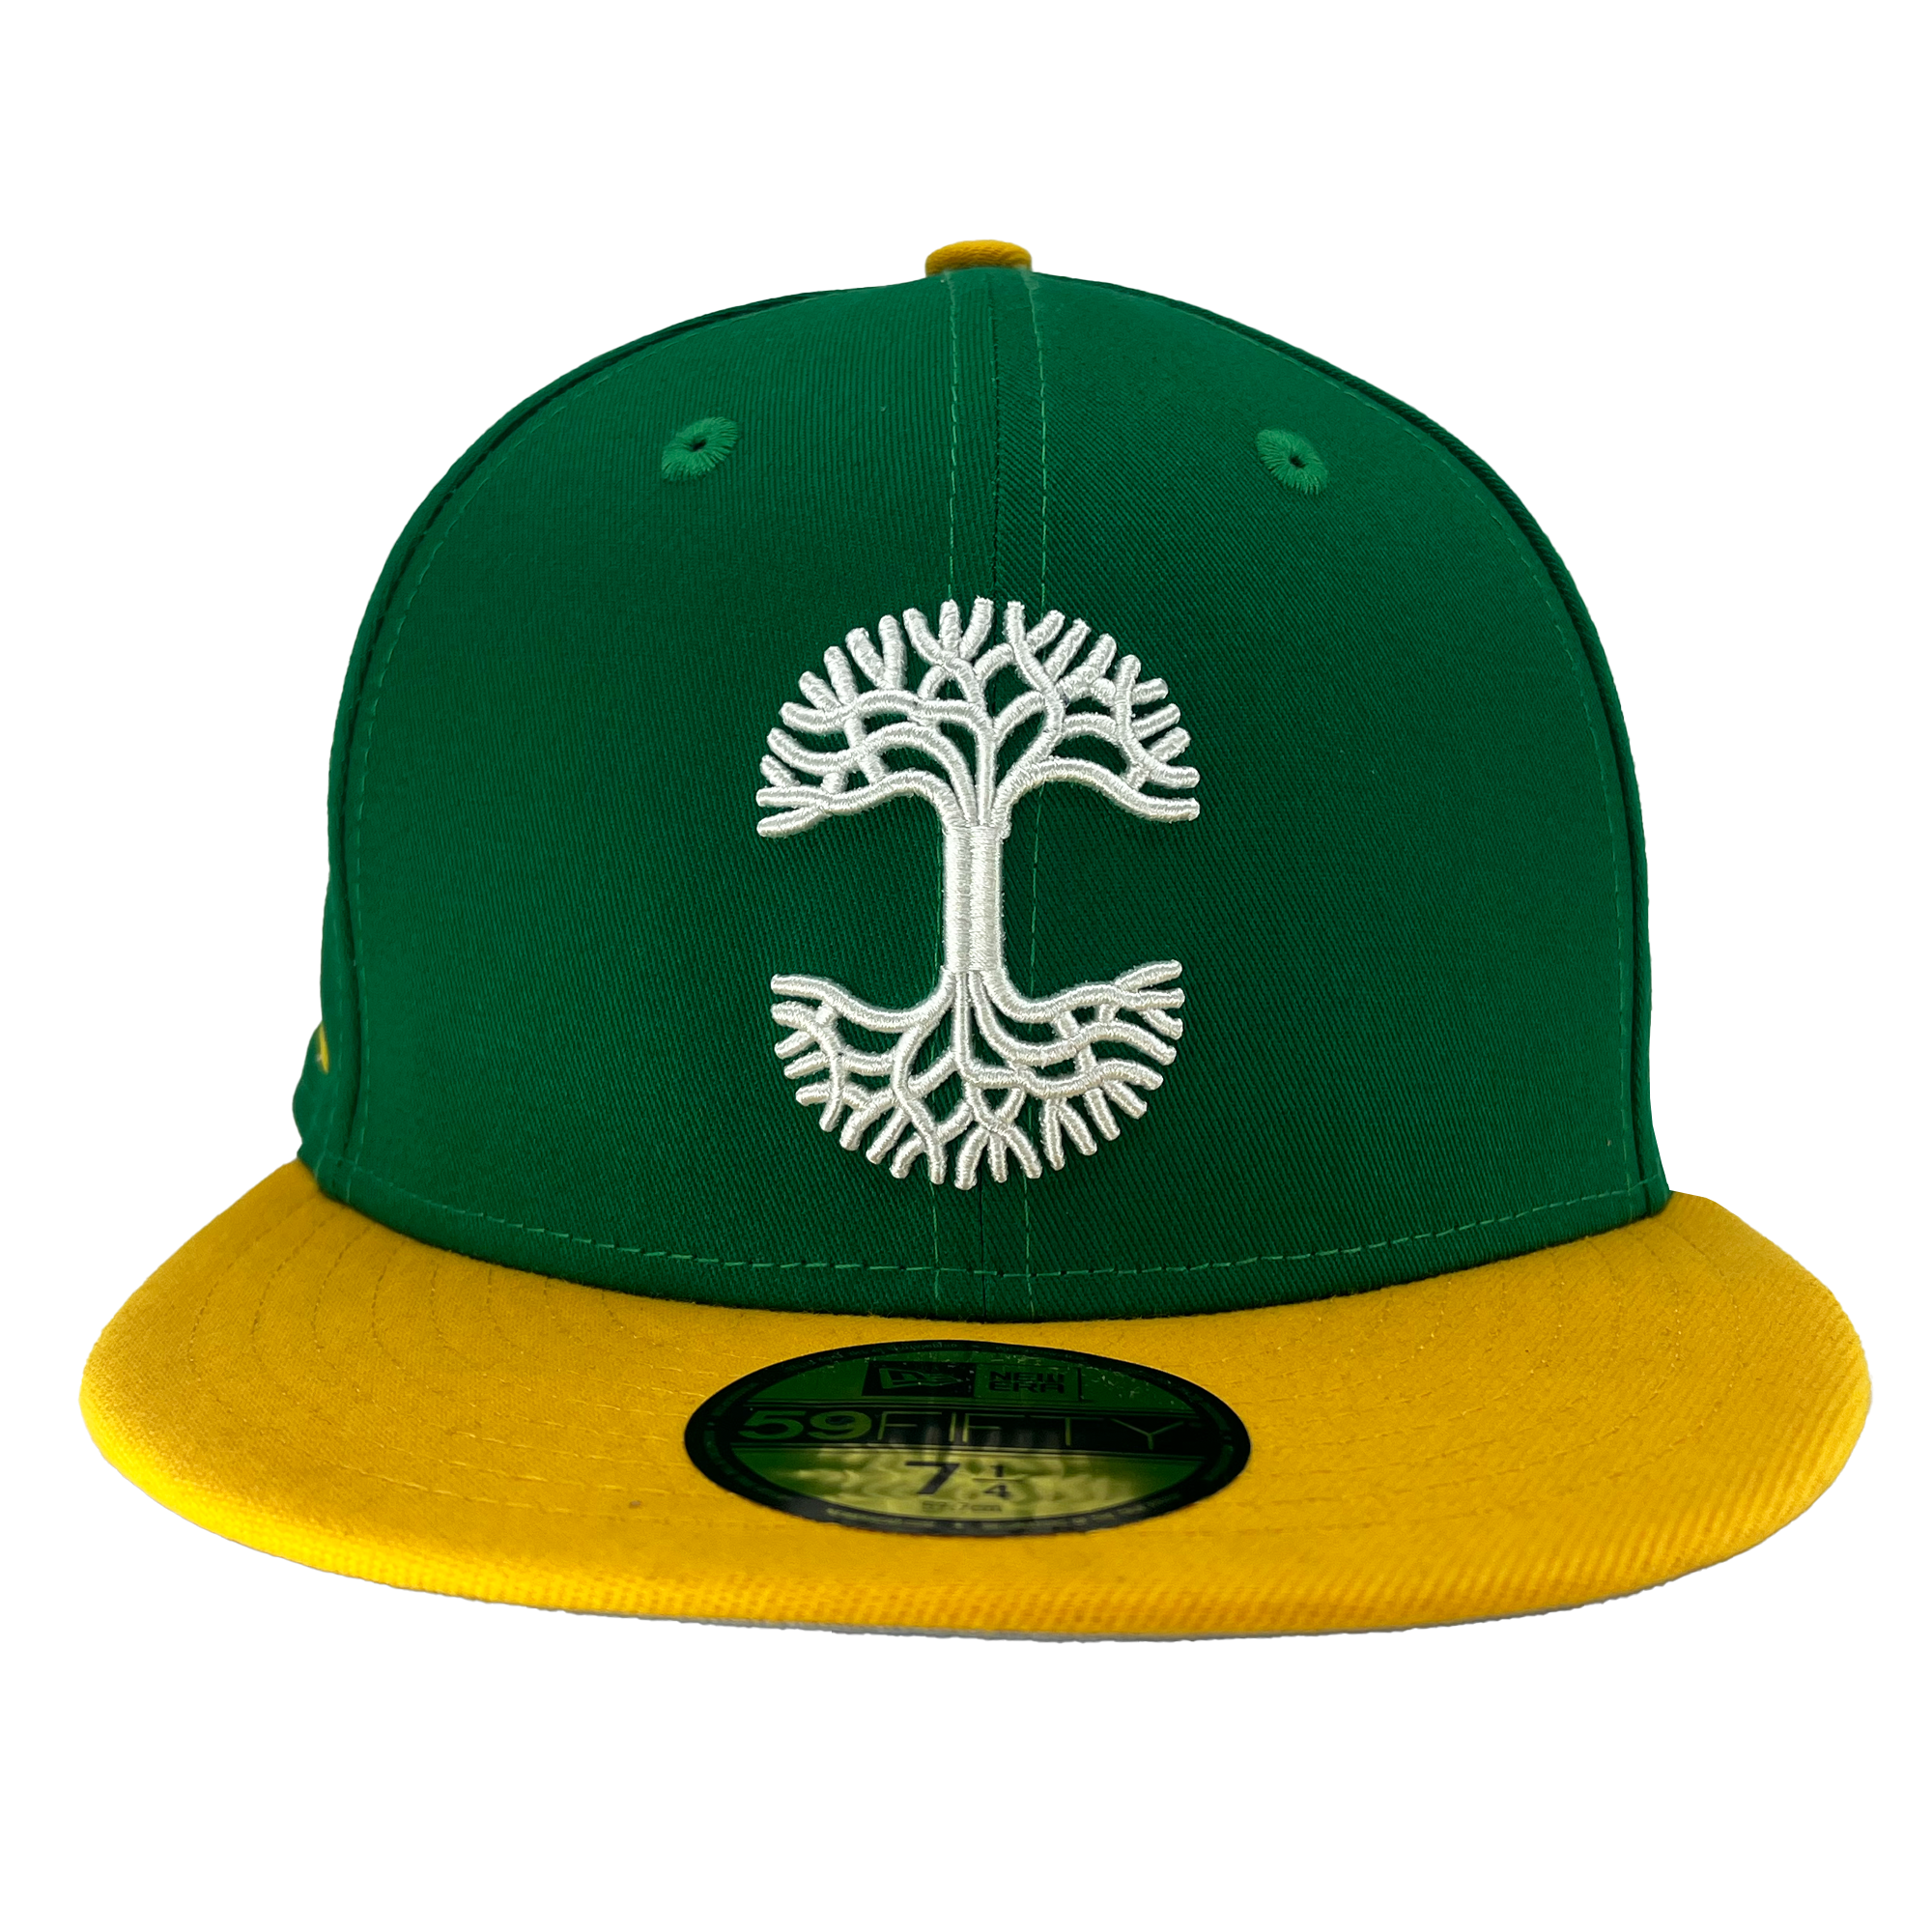 New Era x Oaklandish Classic 59FIFTY Fitted Cap, Green & Gold 7 / Kelly